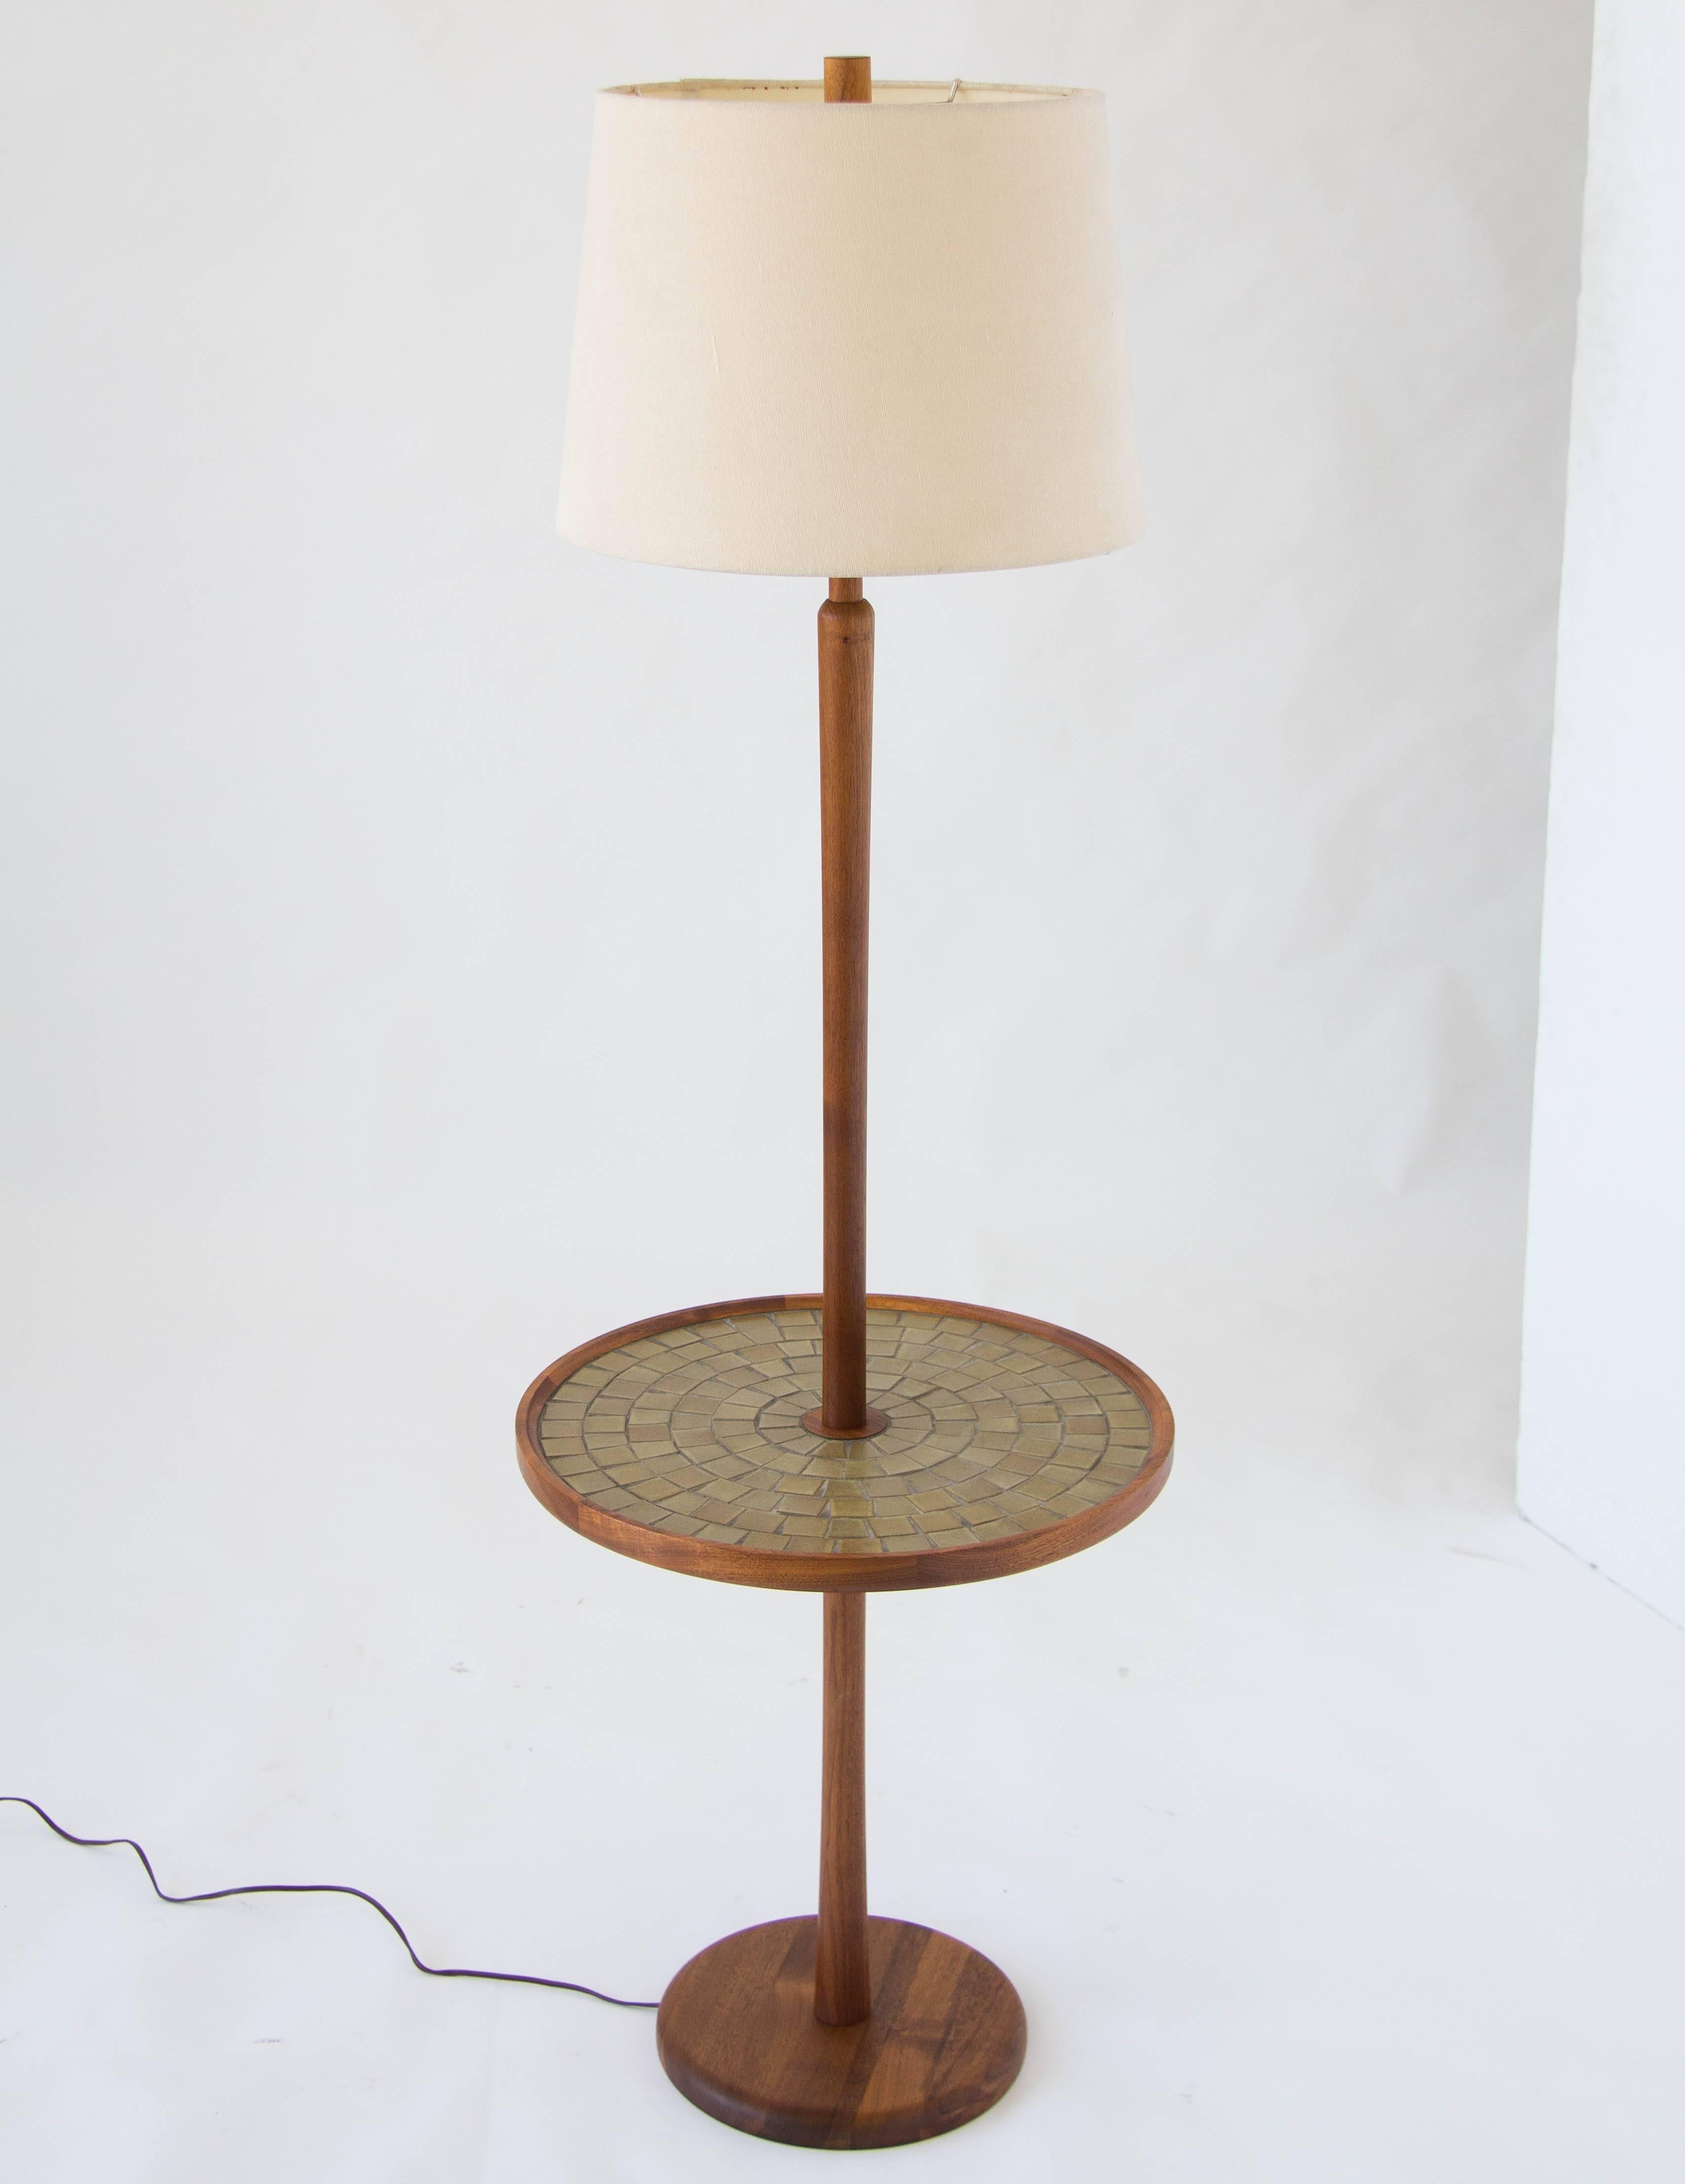 Classic design by Gordon & Jane Martz for Marshall Studios with construction in solid walnut. The floor lamp has a walnut column, ringed by a tabletop inlaid with a mosaic of square ceramic tiles. Visible lighting components are brass, with a